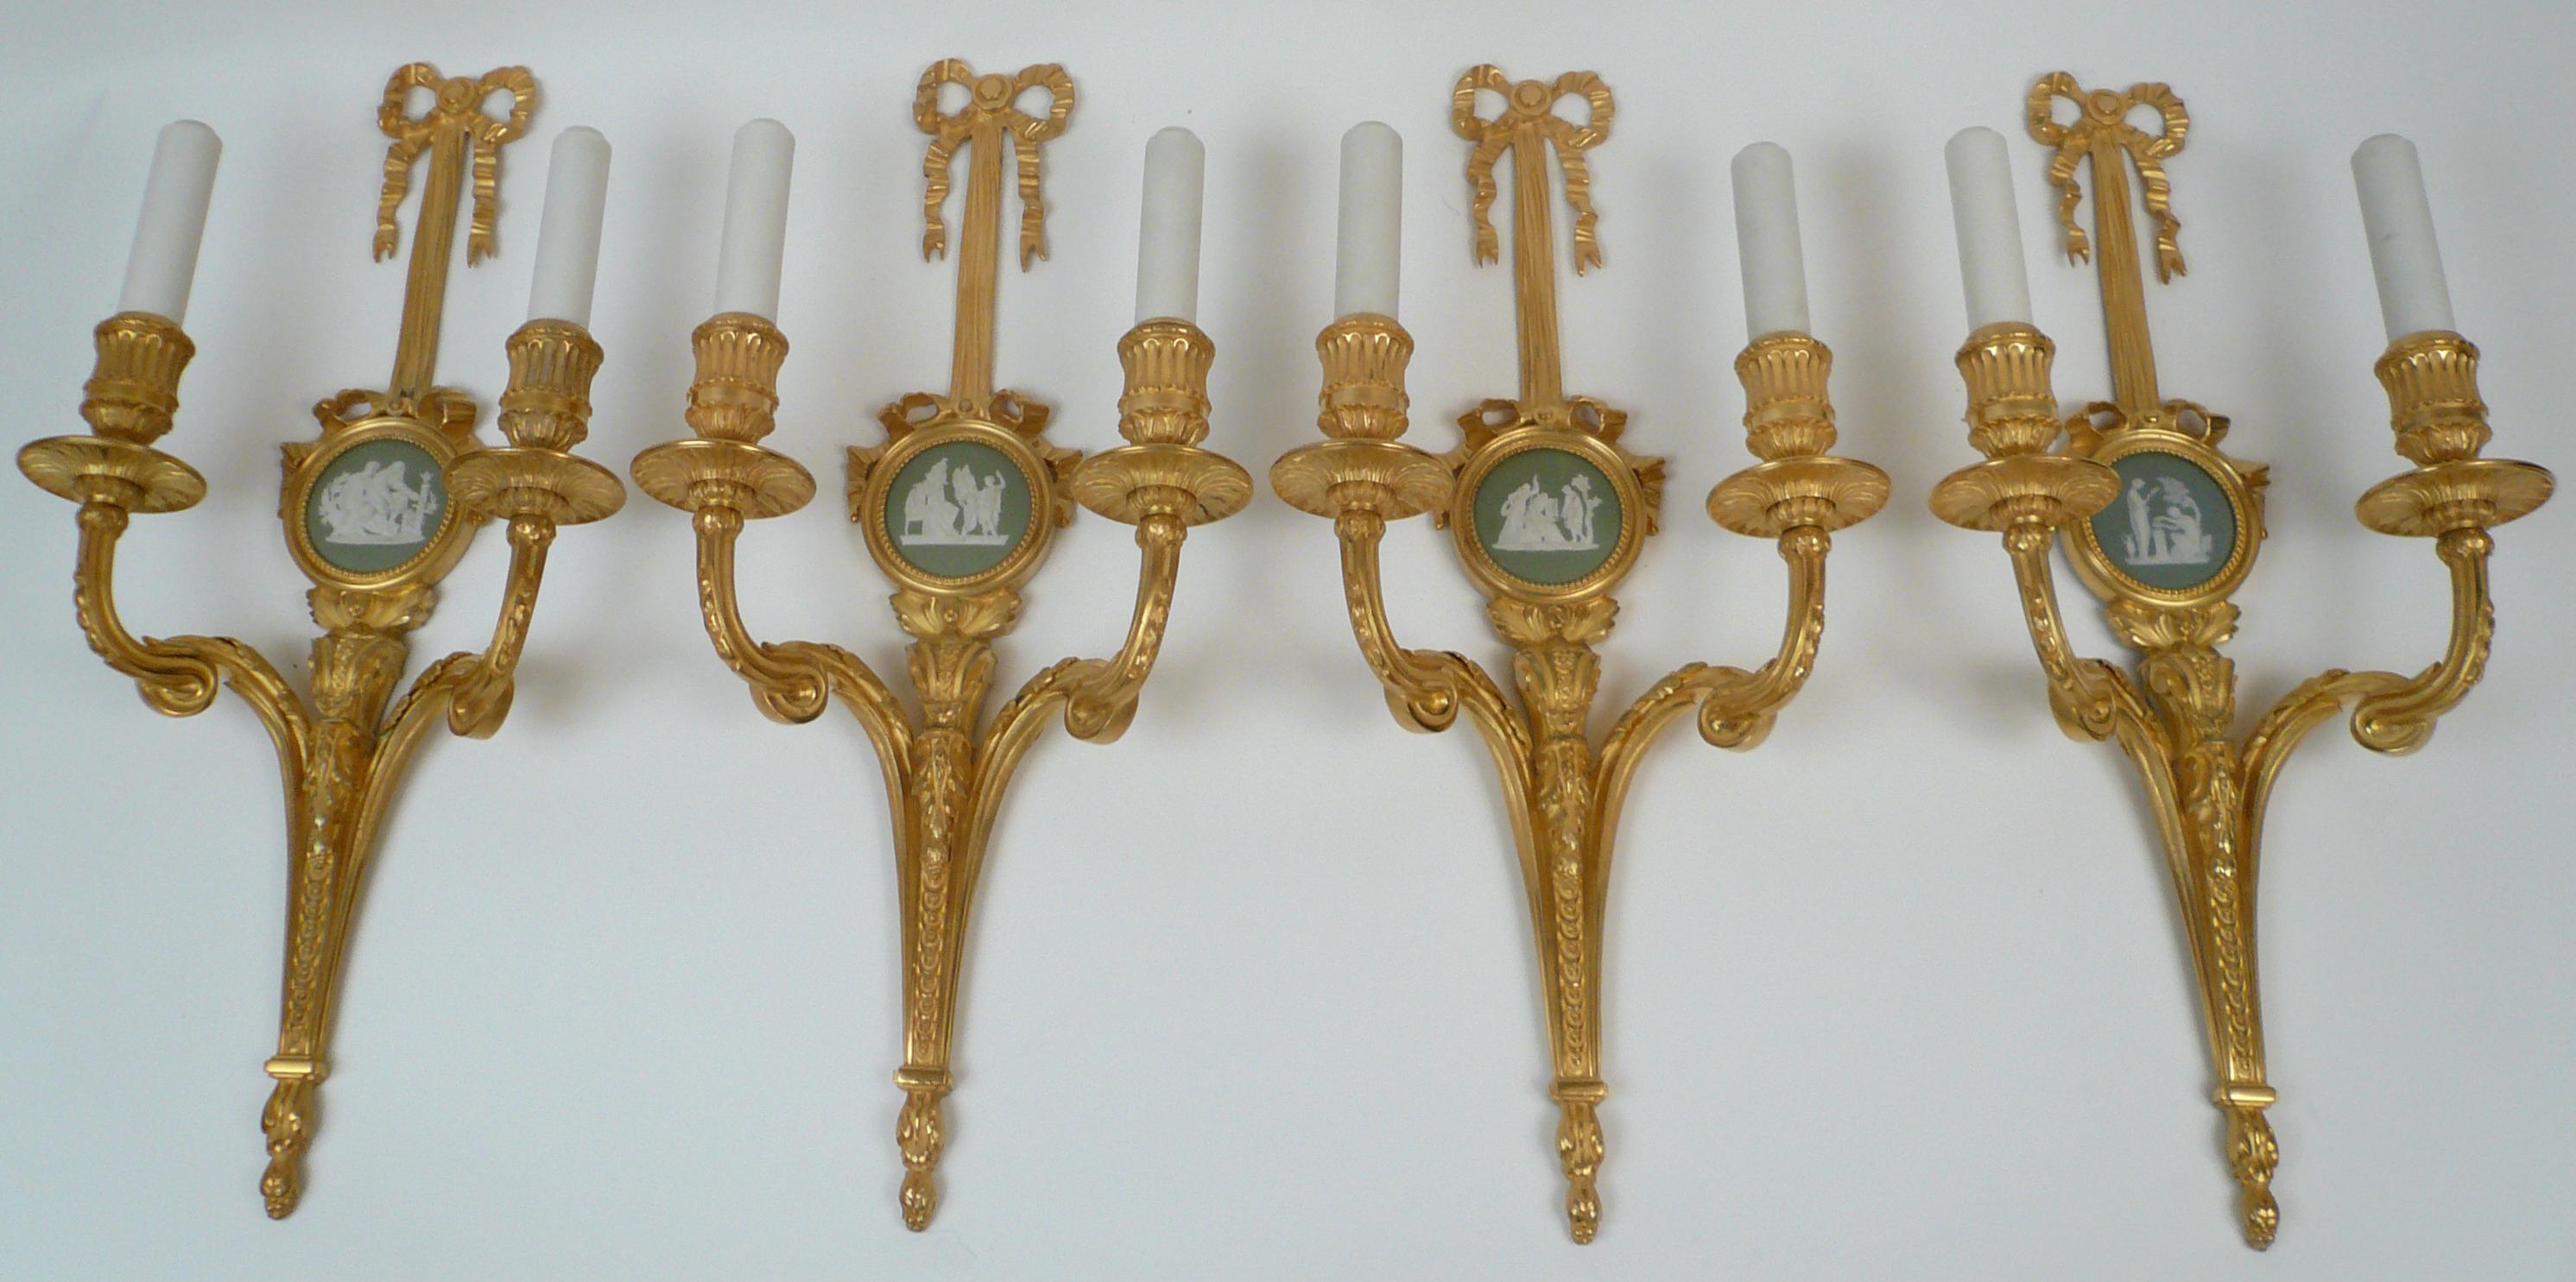 These beautiful sconces are of the finest quality, and feature Classical motifs including bowknots and acanthus leaves. They are mounted with sage green Wedgwood jasperware plaques.